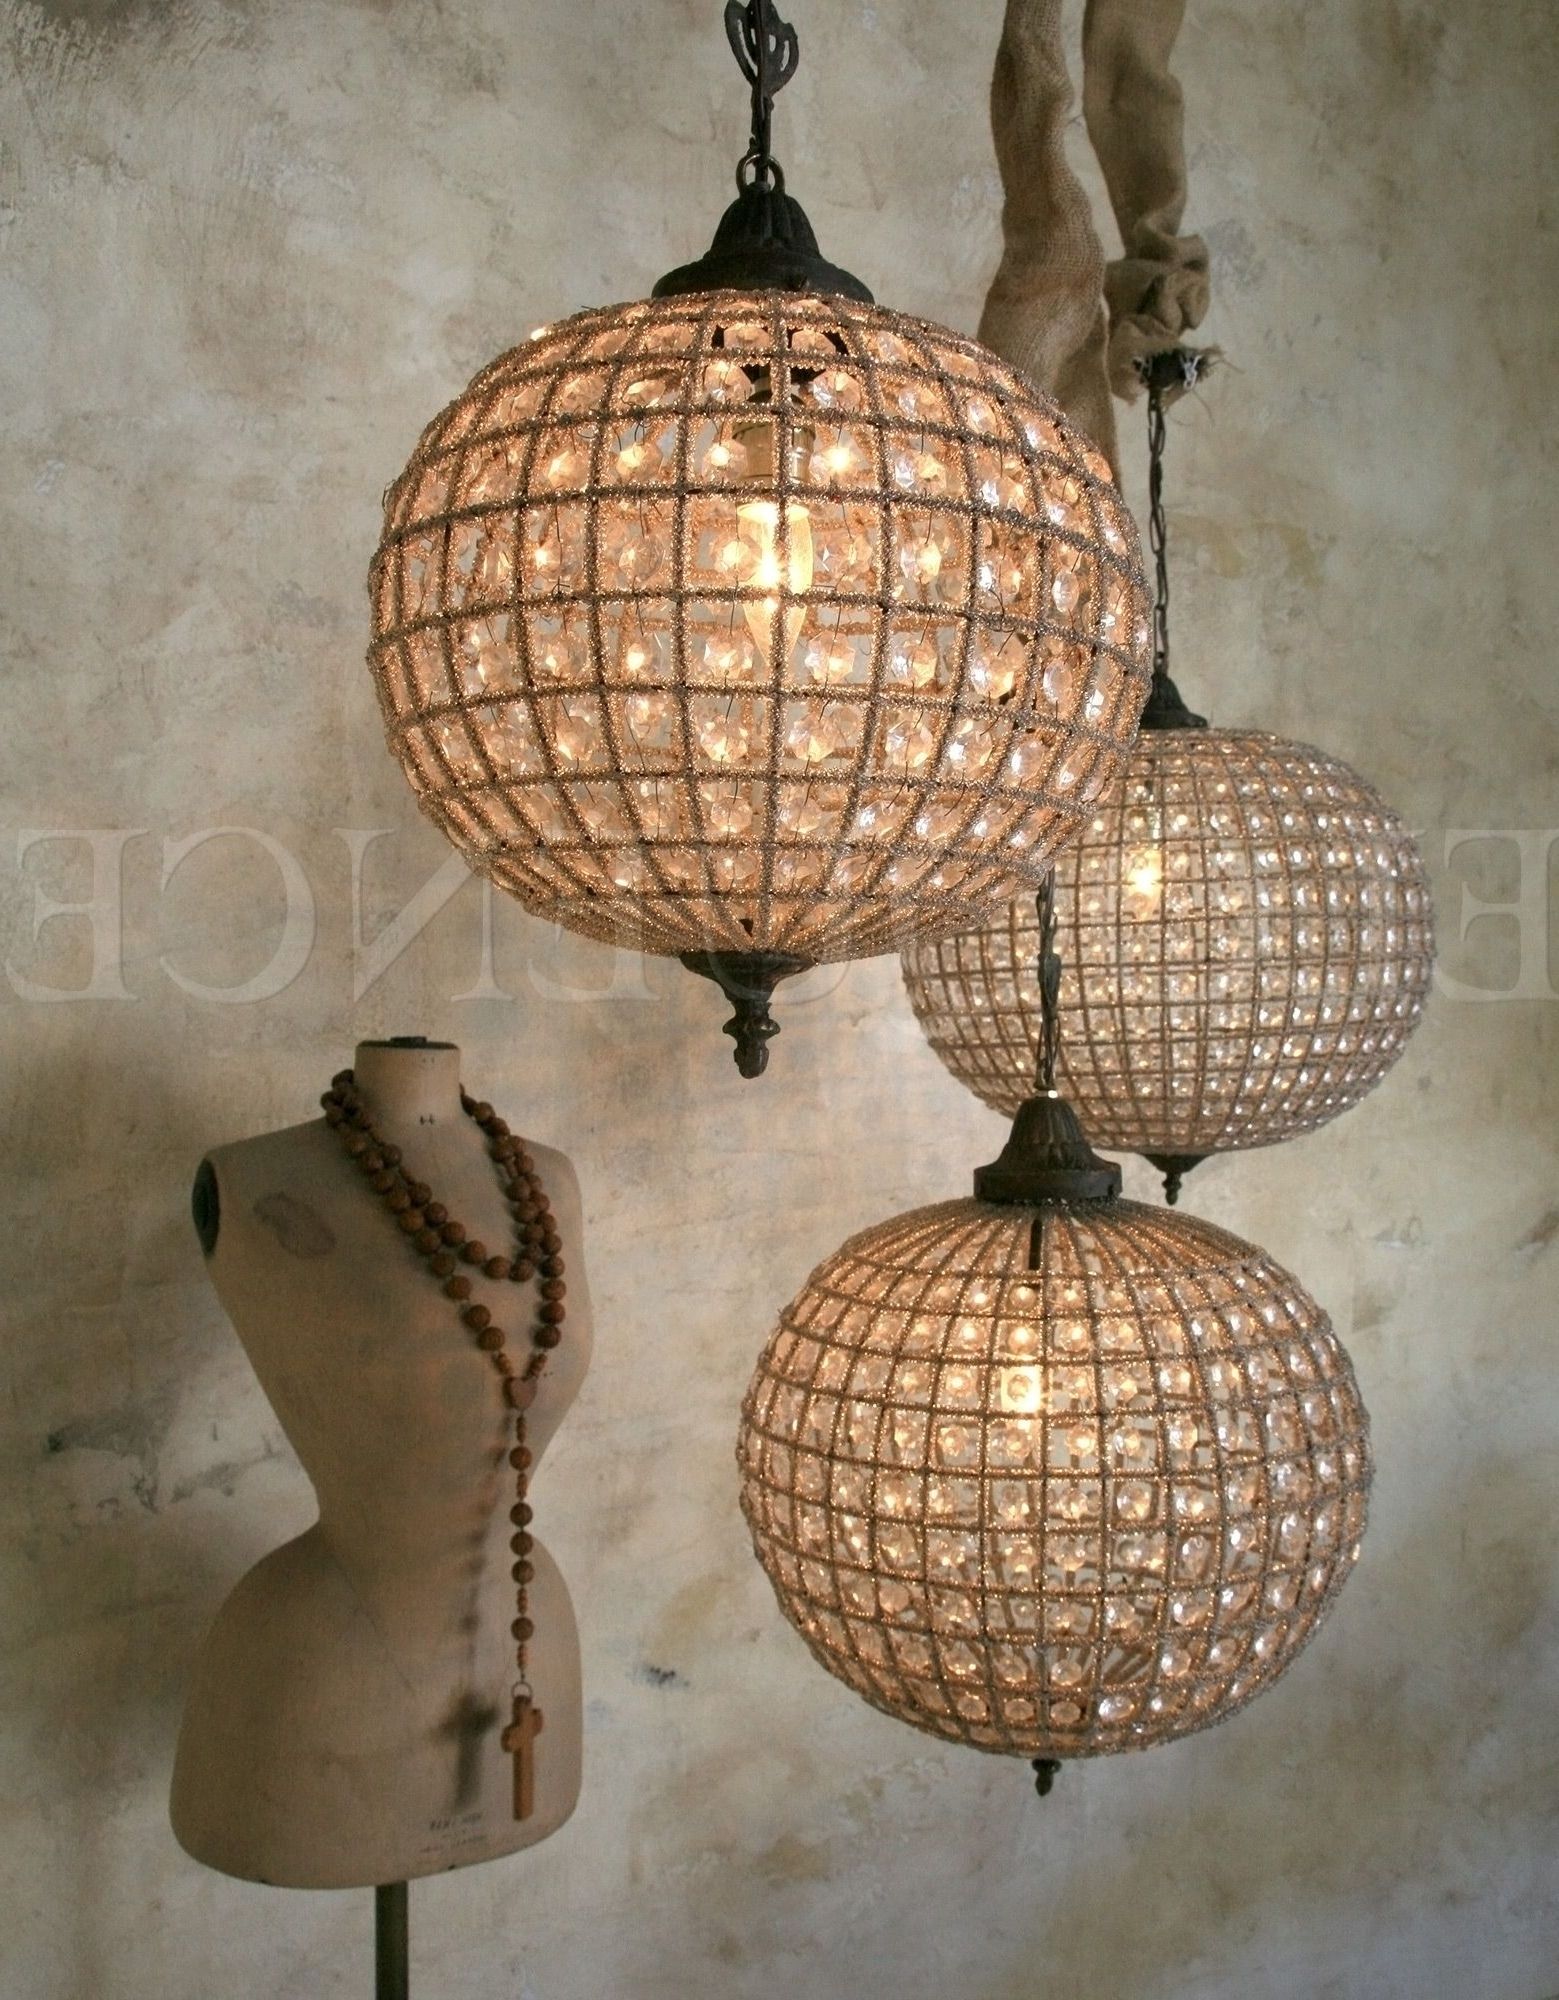 2019 Eloquence Globe Chandelier Throughout Eloquence, Inc (View 1 of 20)